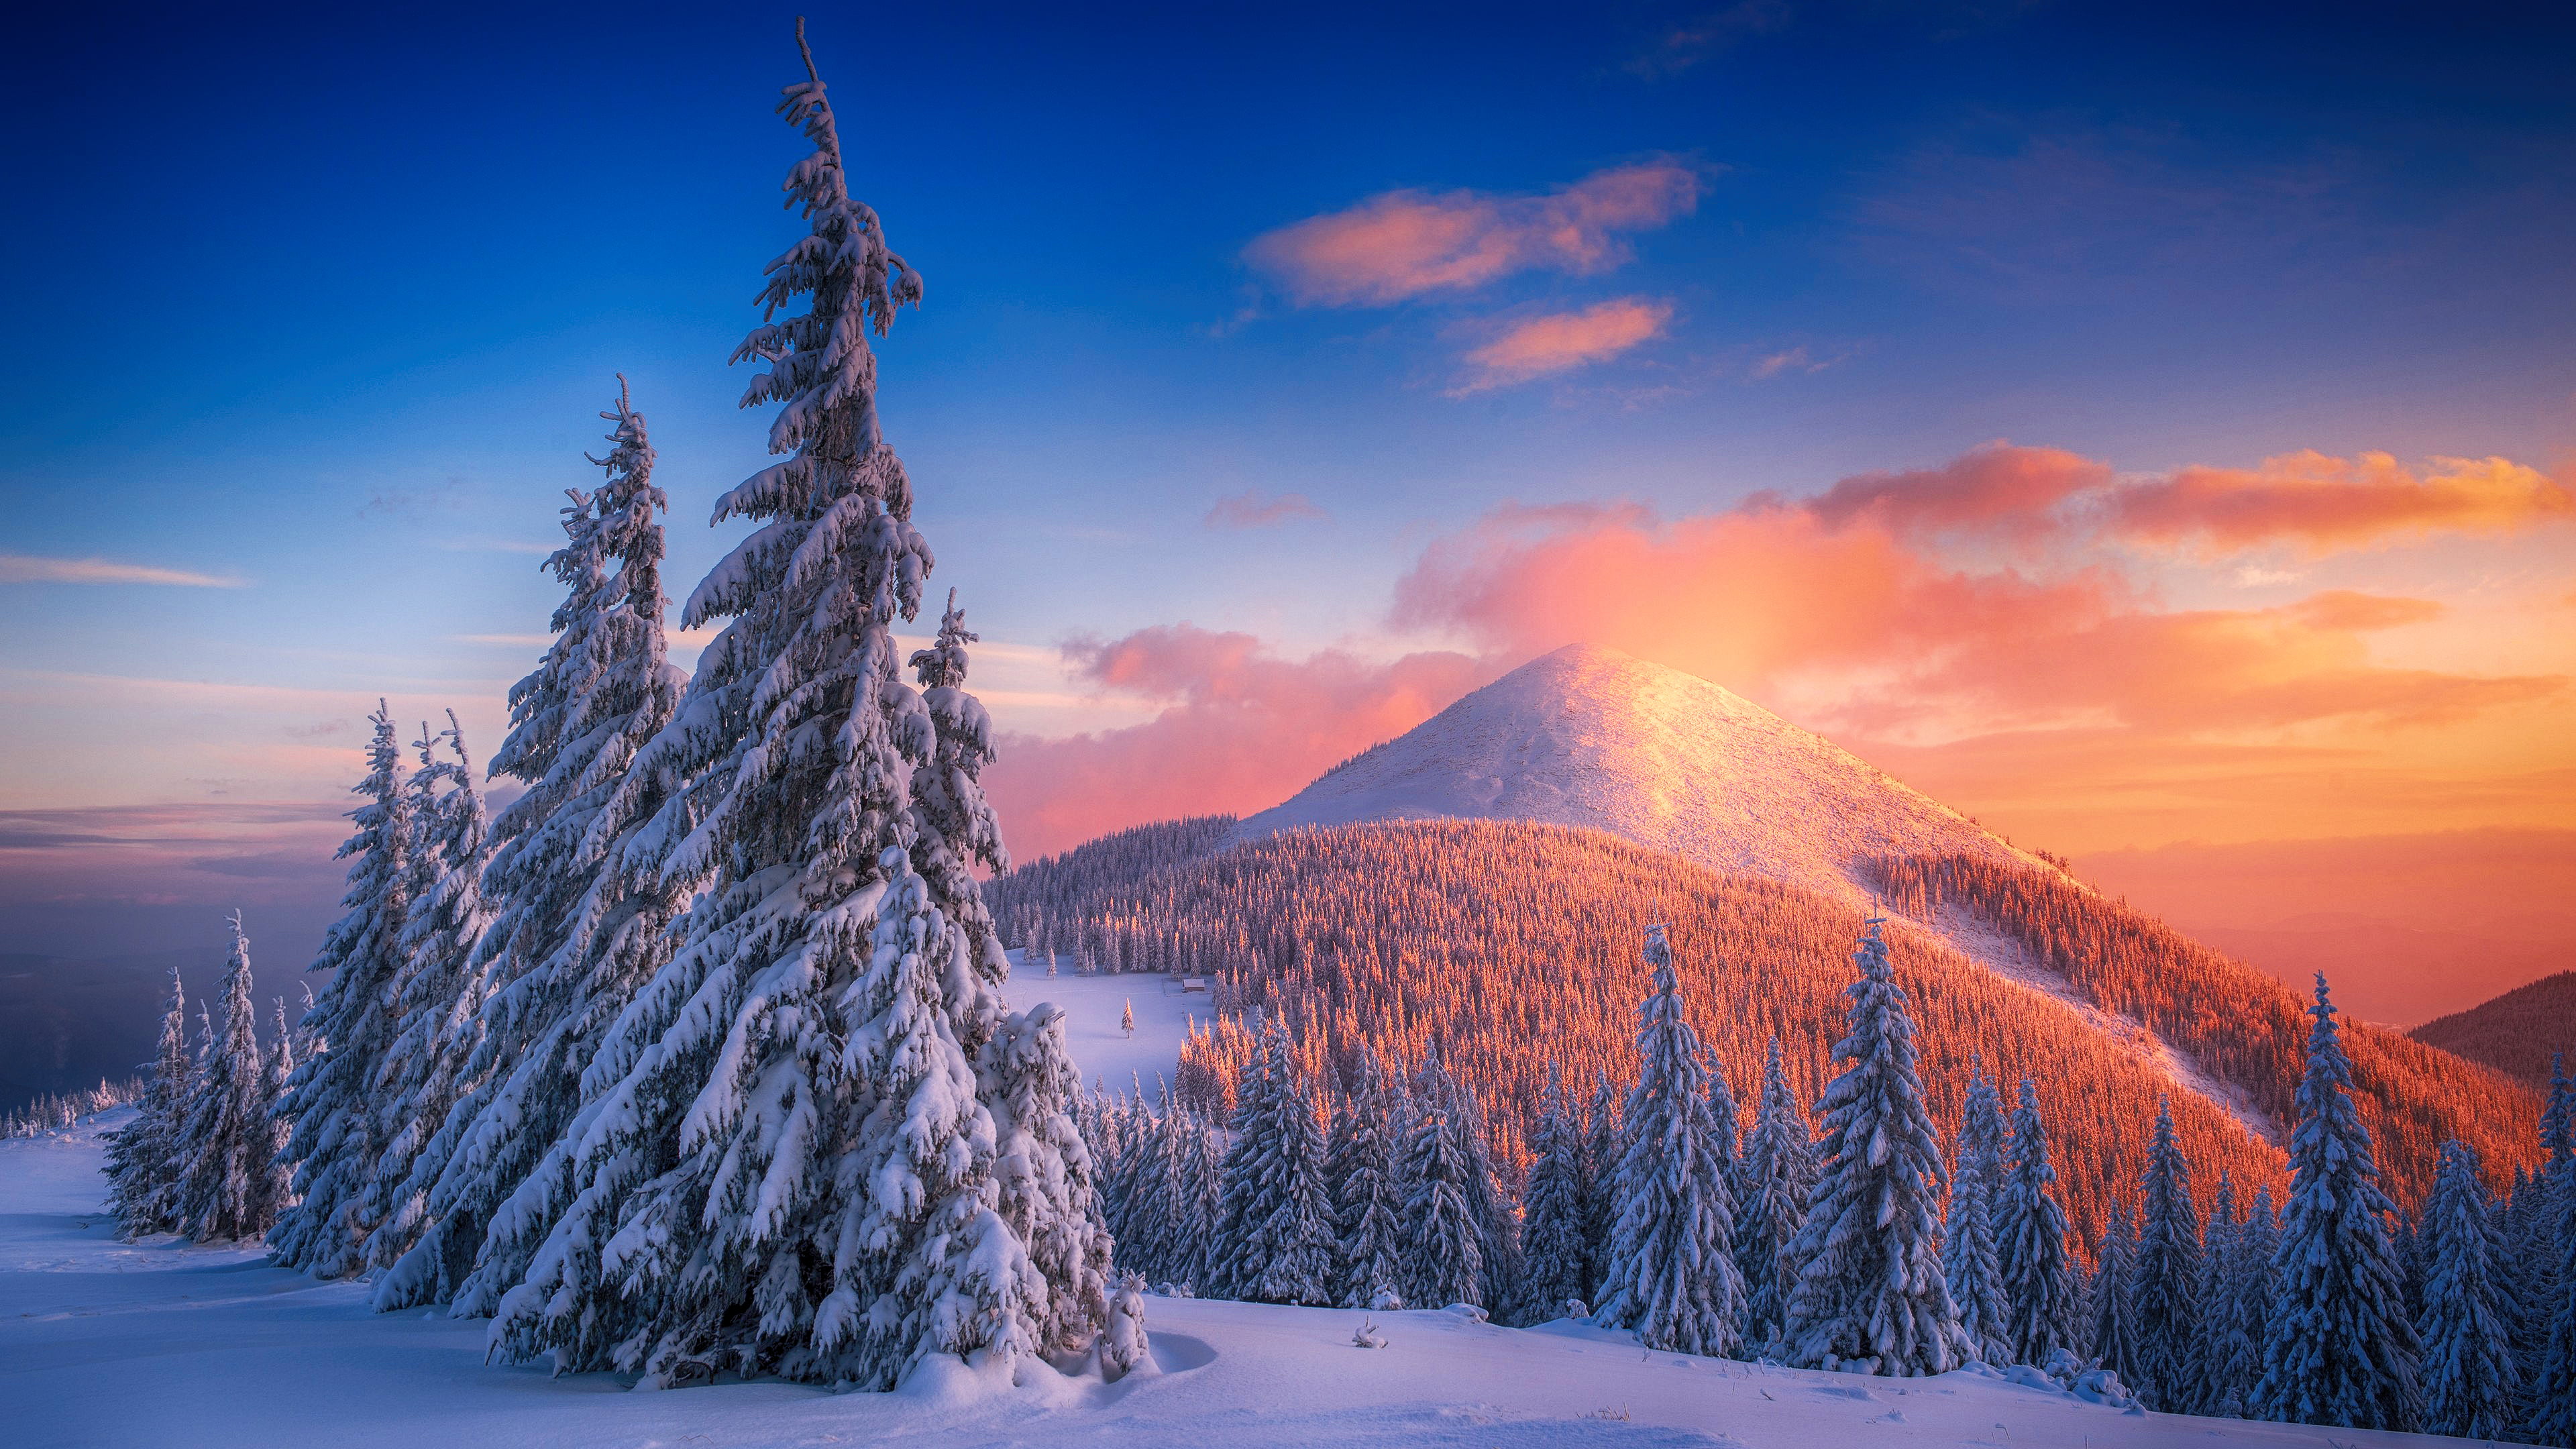 snow, winter, mountains, sunset, cold, landscape, forest